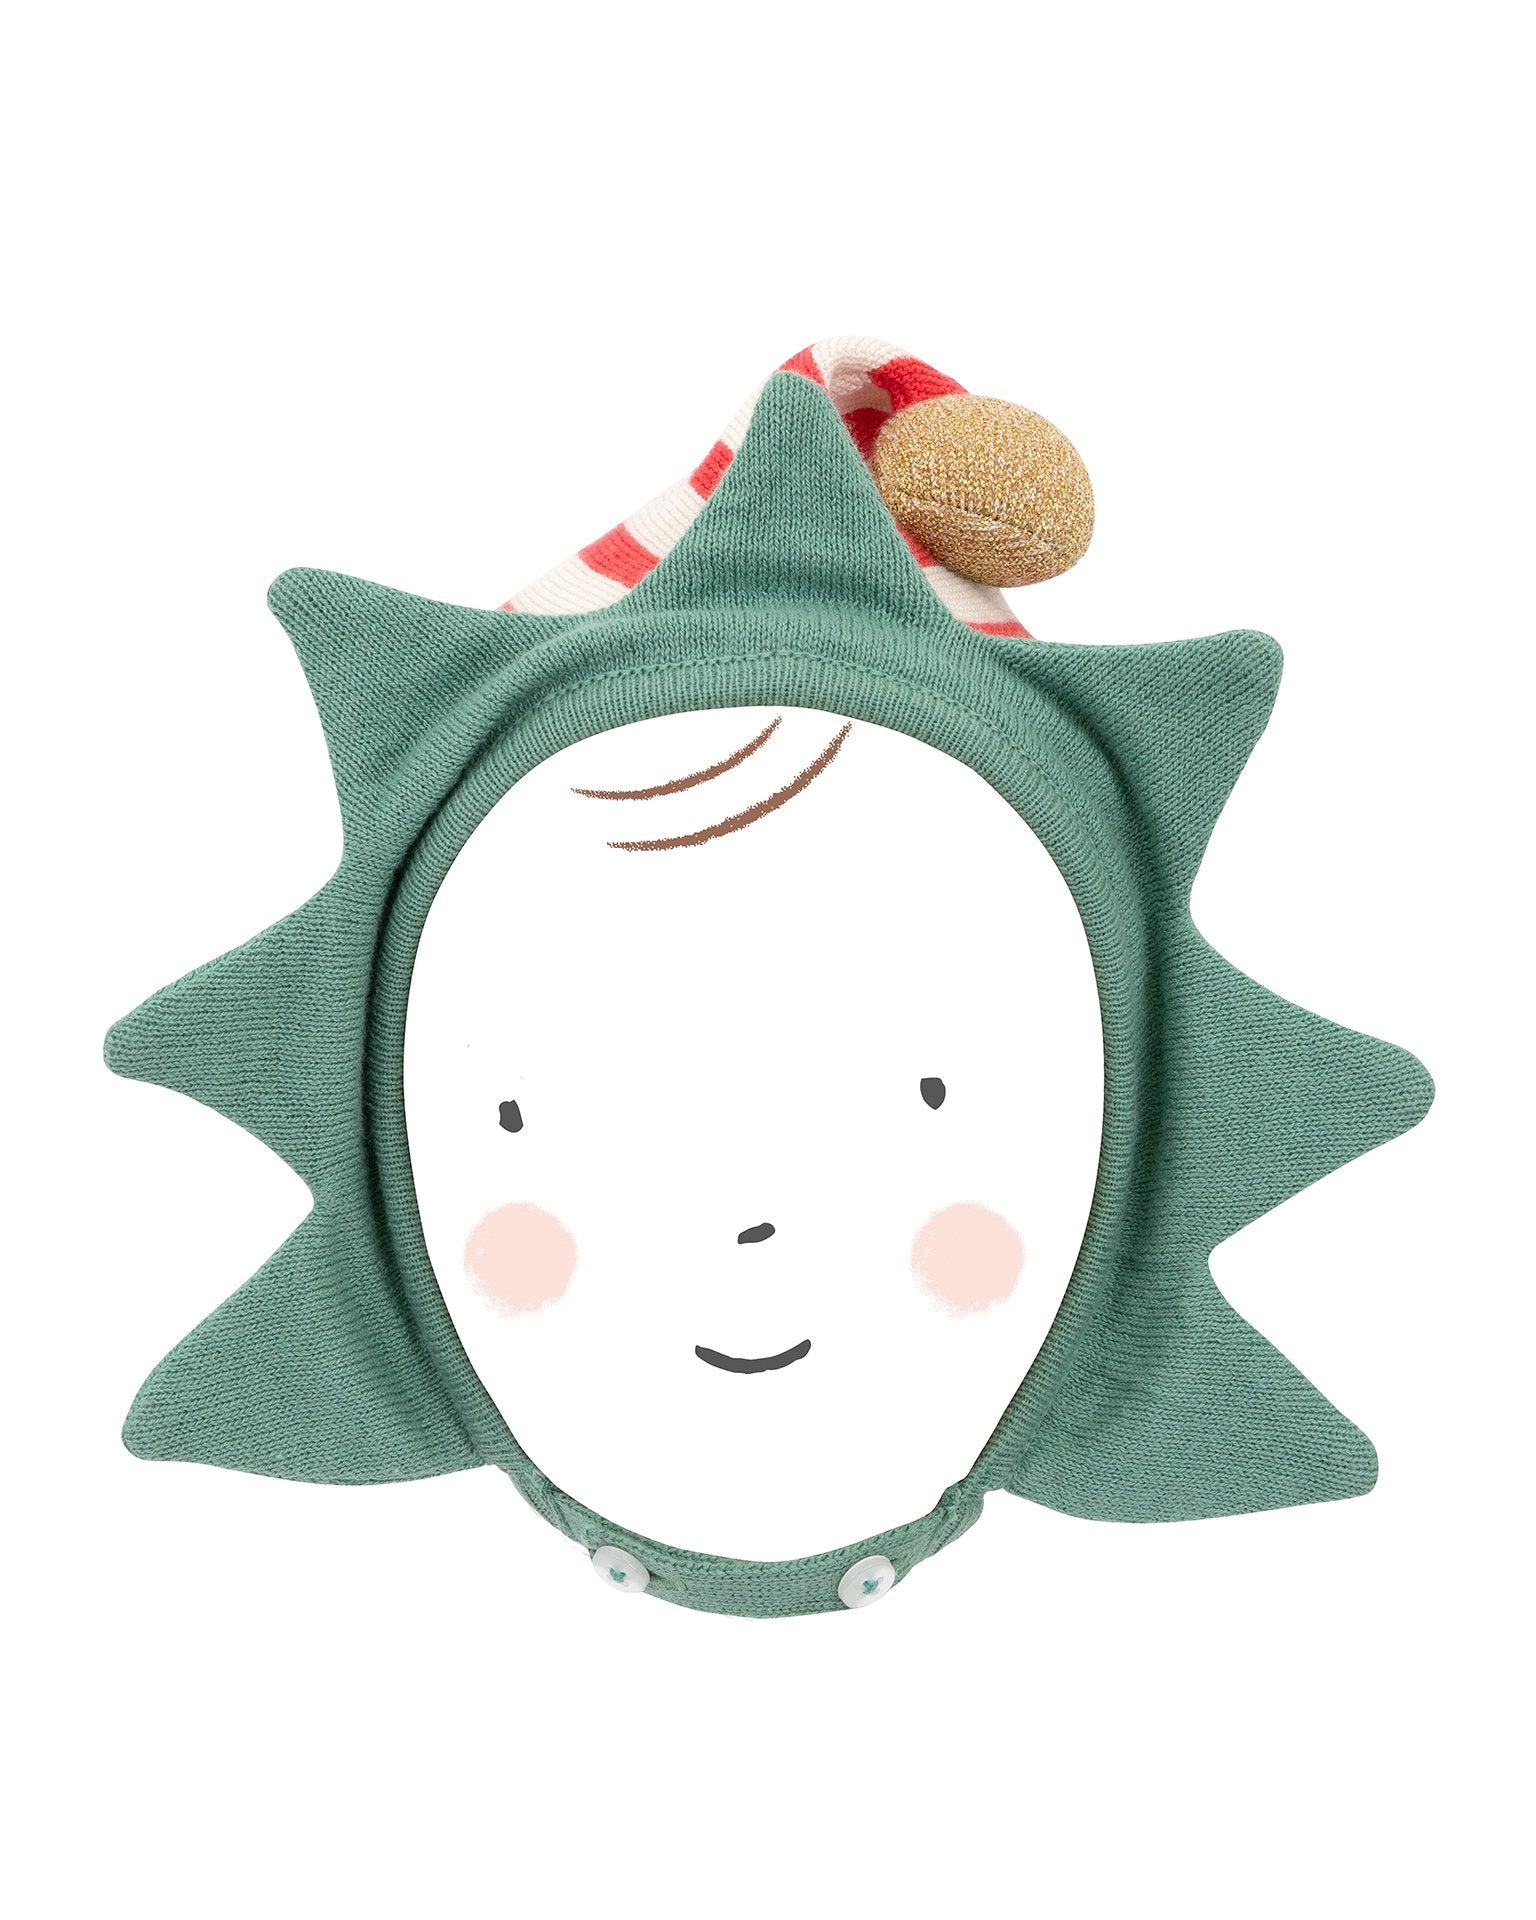 Elf Baby Bonnet - TREEHOUSE kid and craft